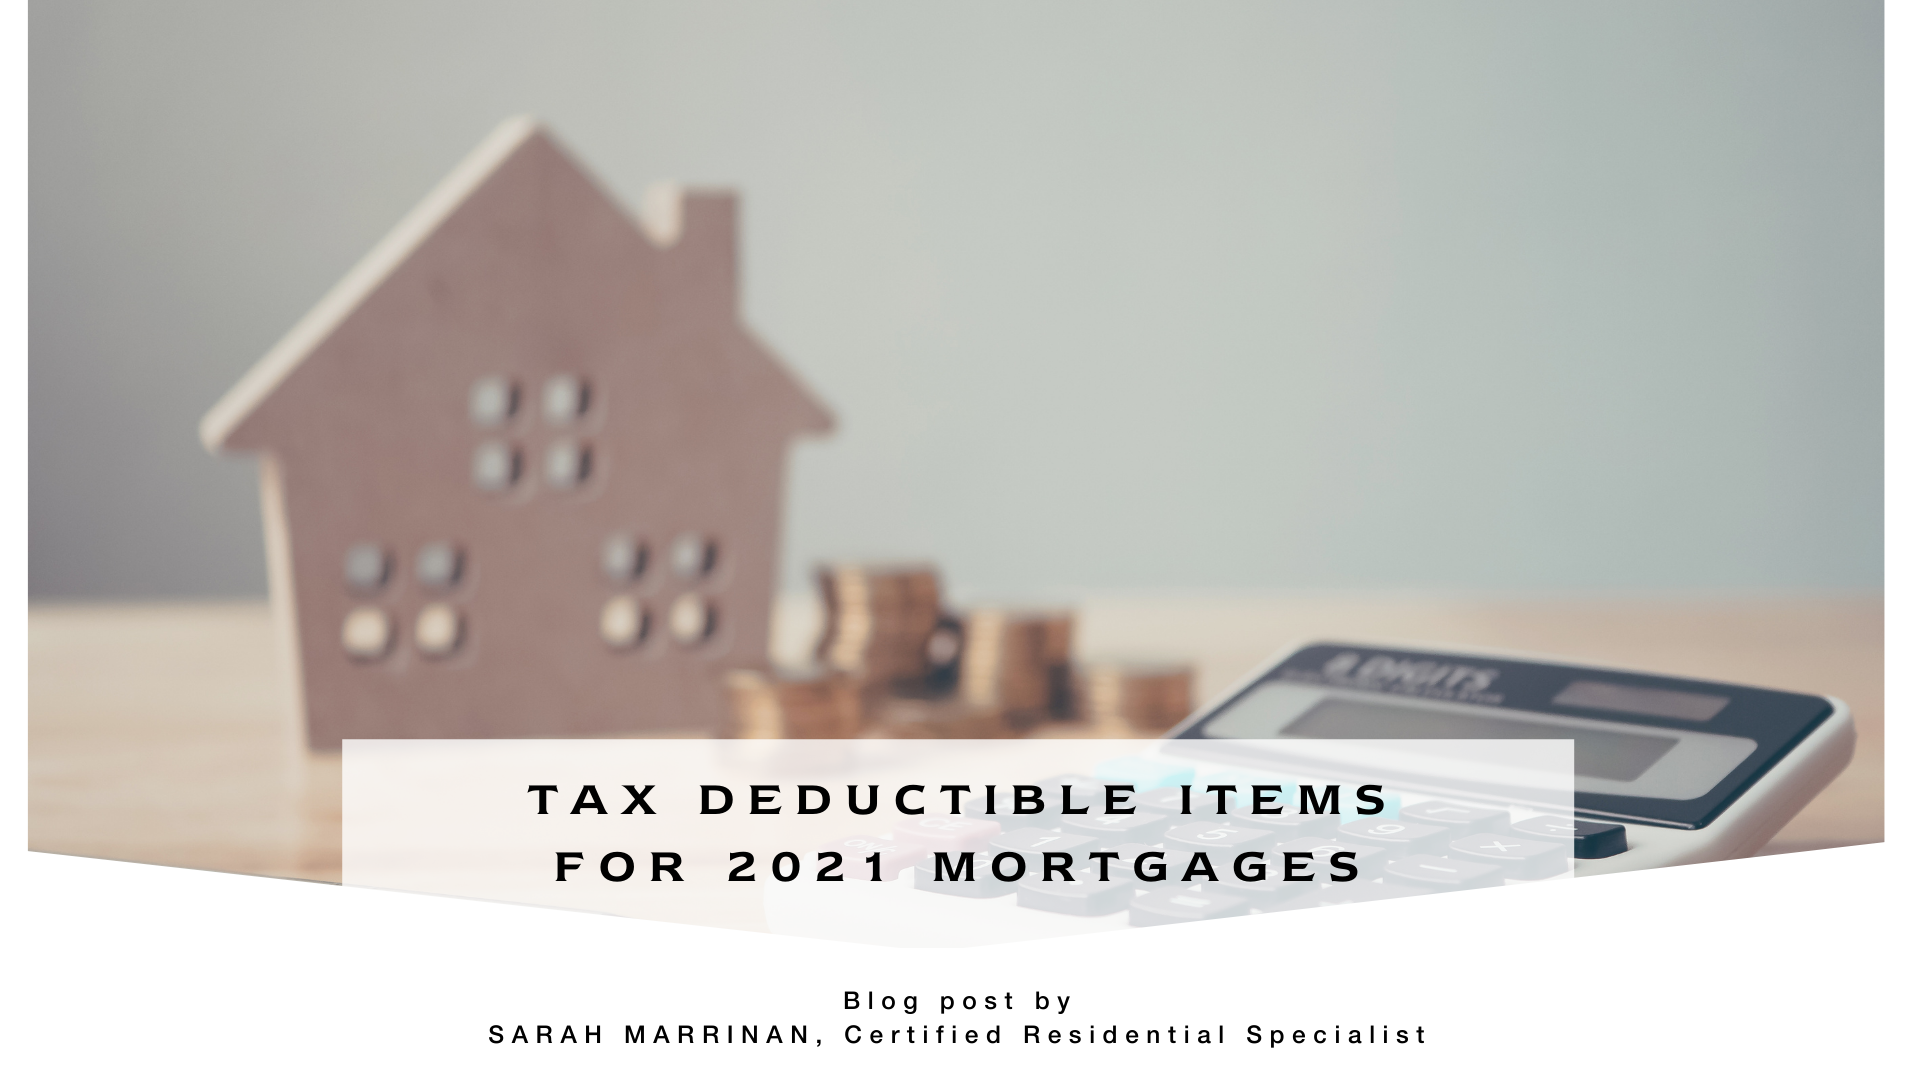 2021 Mortgage Tax Deductible Items